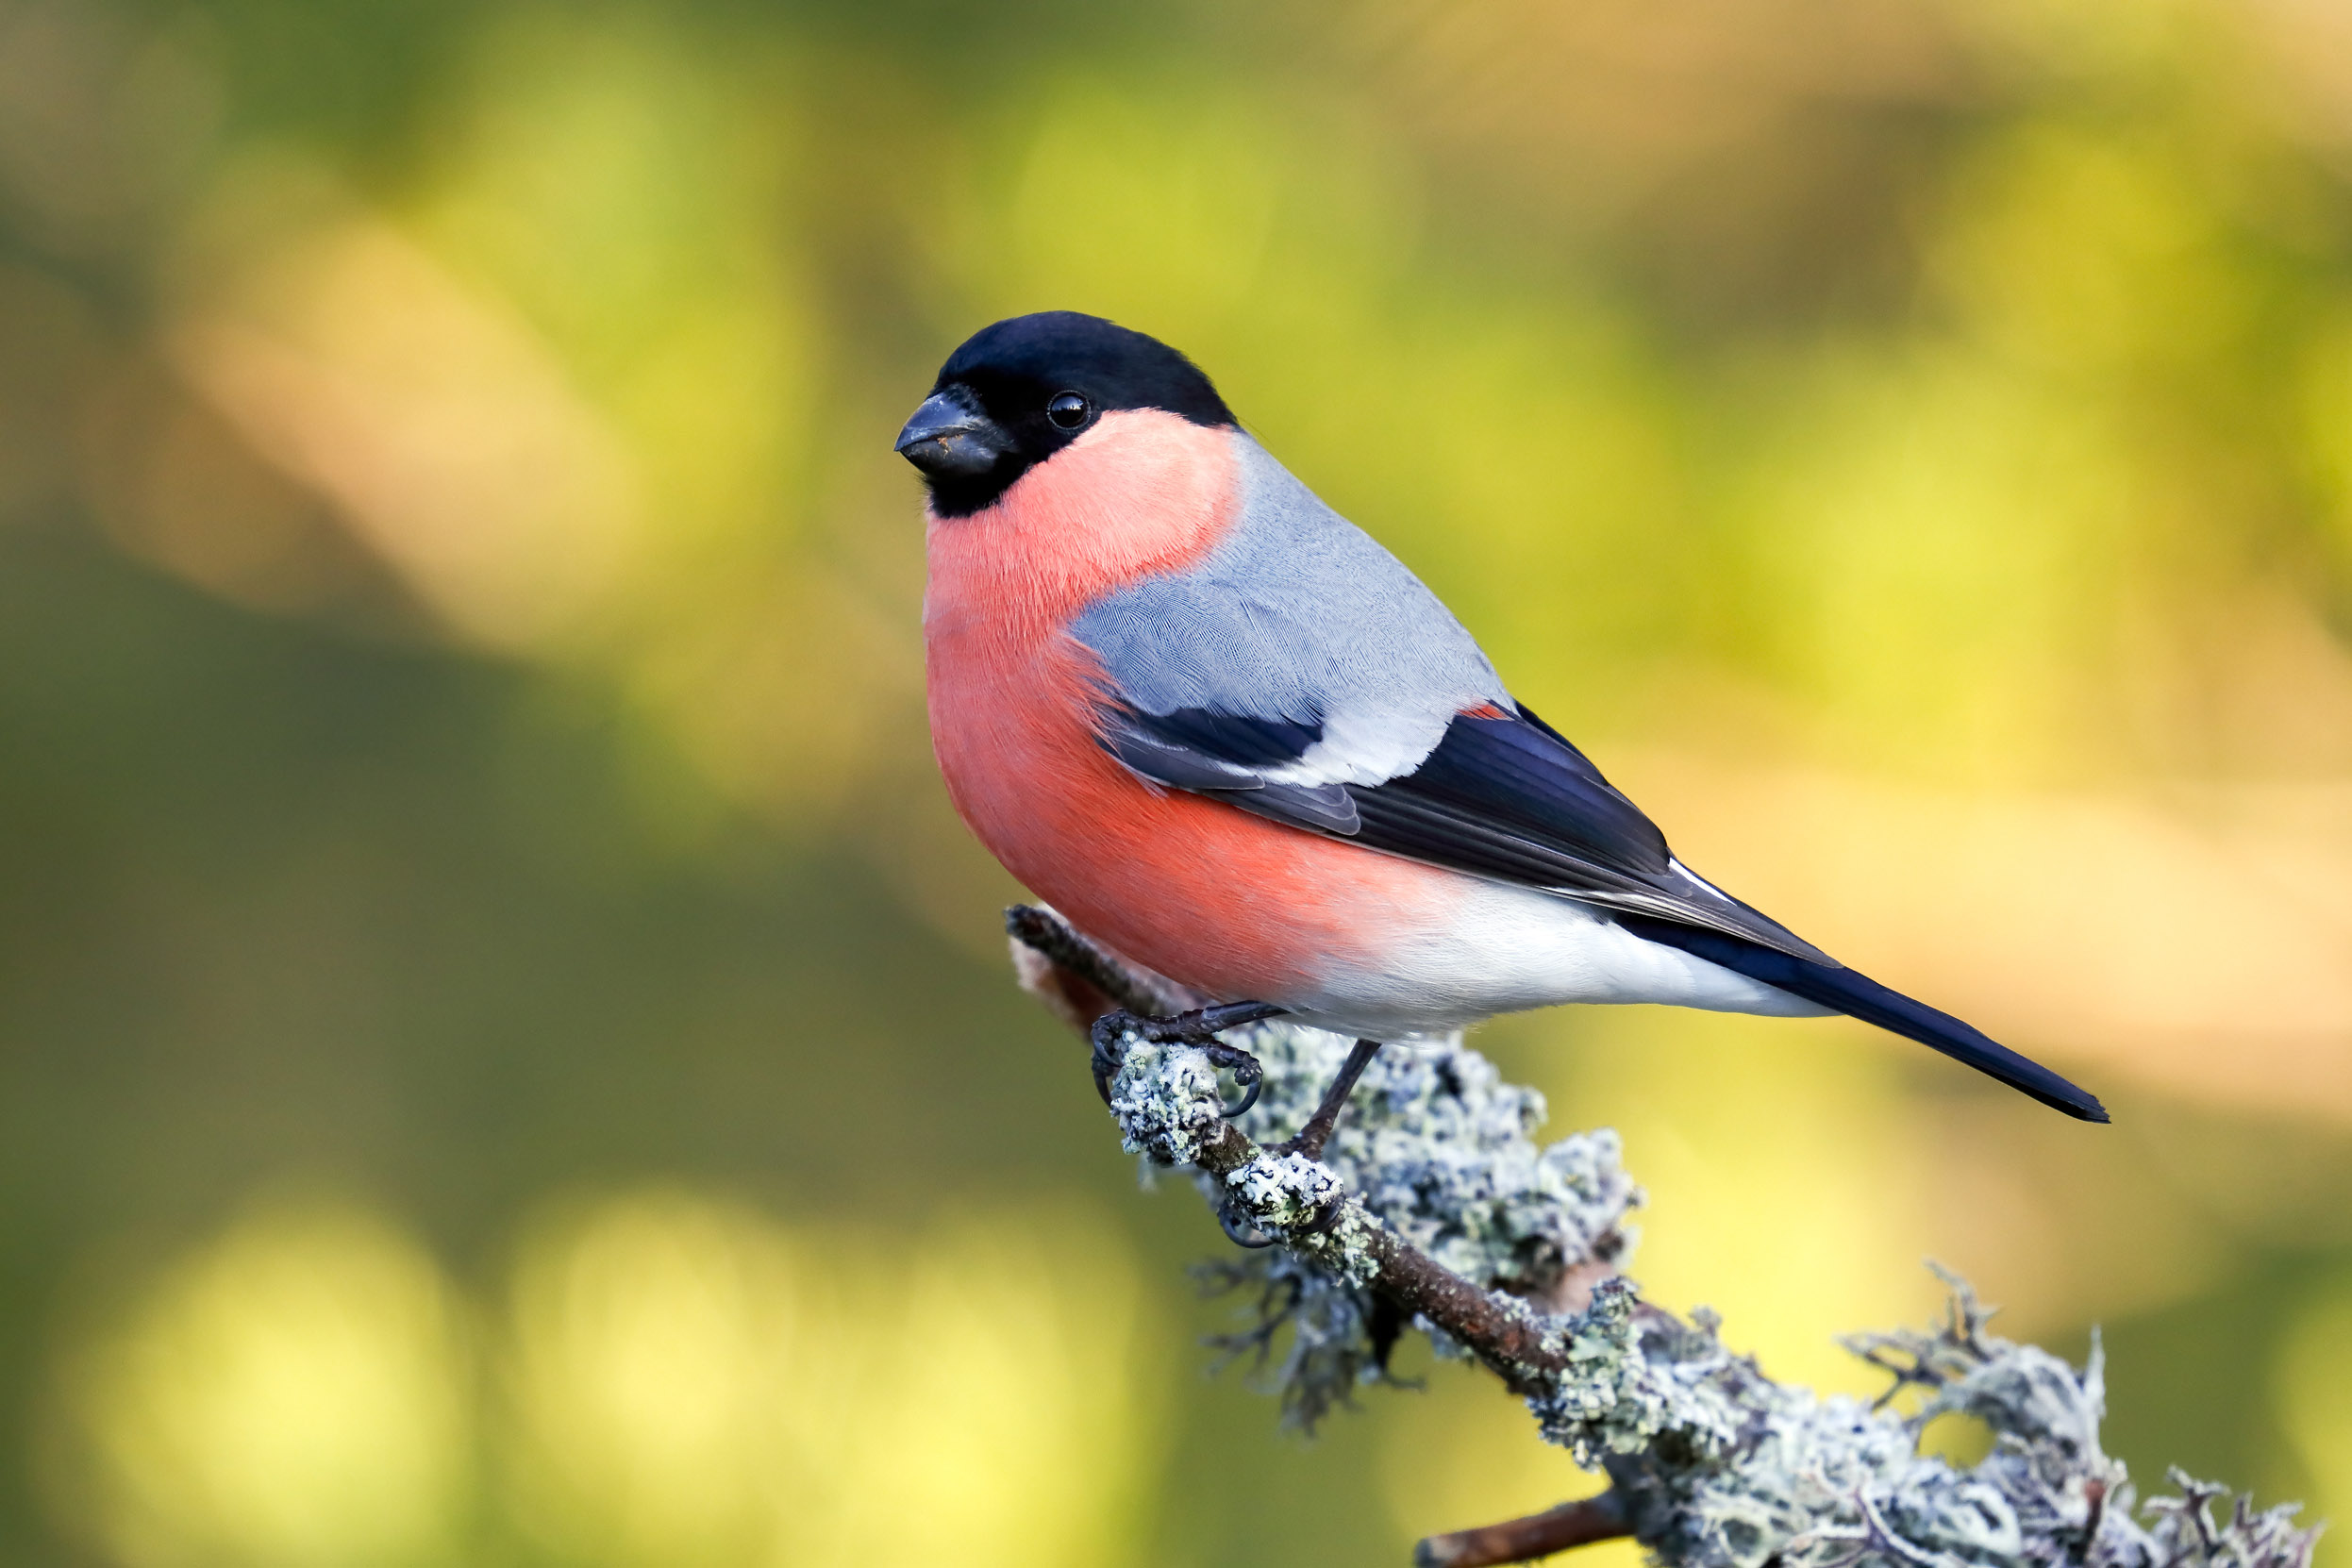 A male Bullfinch perched on a branch with sunlit greenery behind him